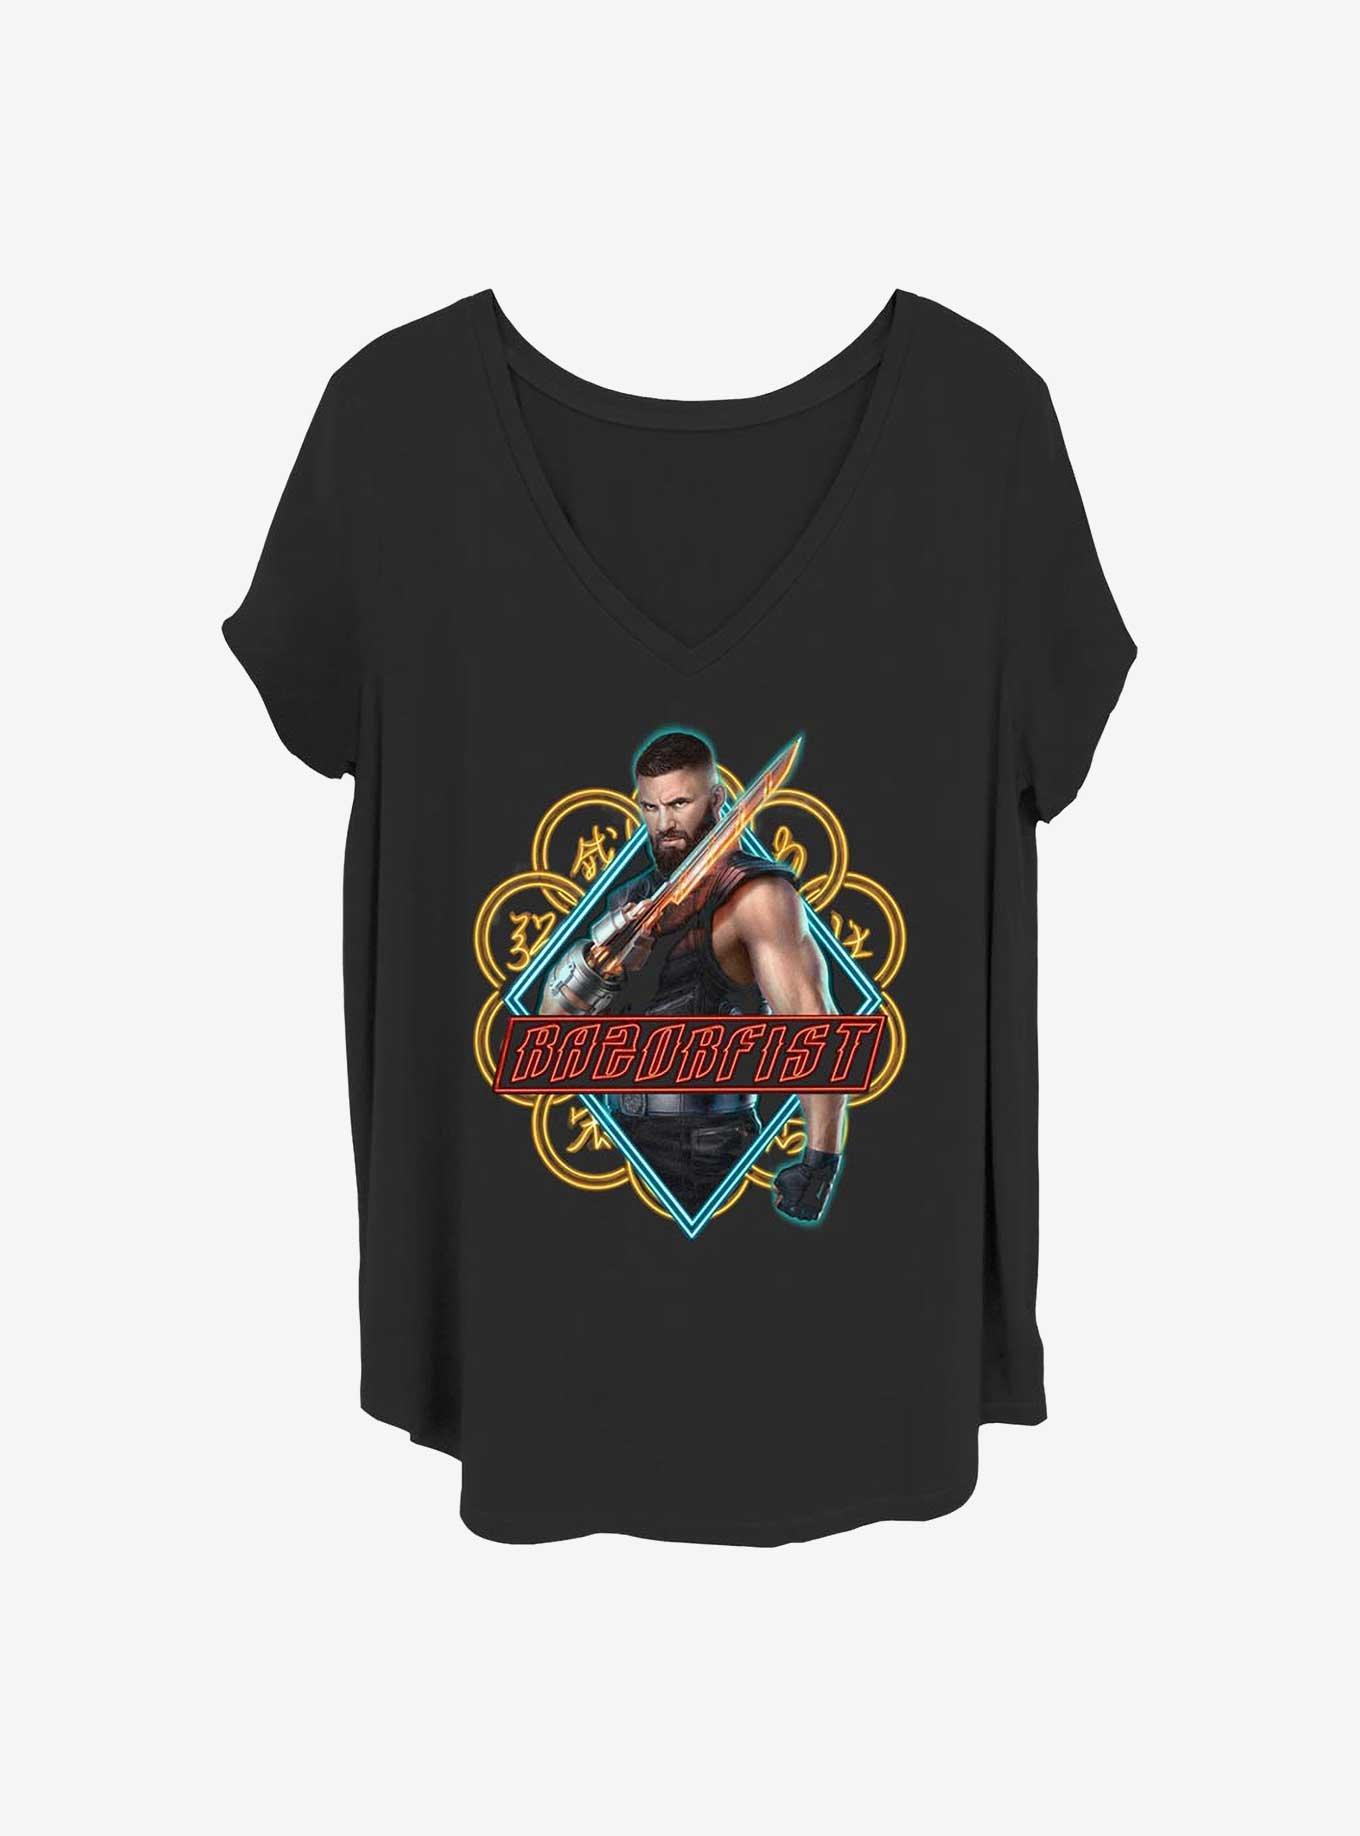 Marvel Shang-Chi and the Legend of Ten Rings Razorfist Girls T-Shirt Plus